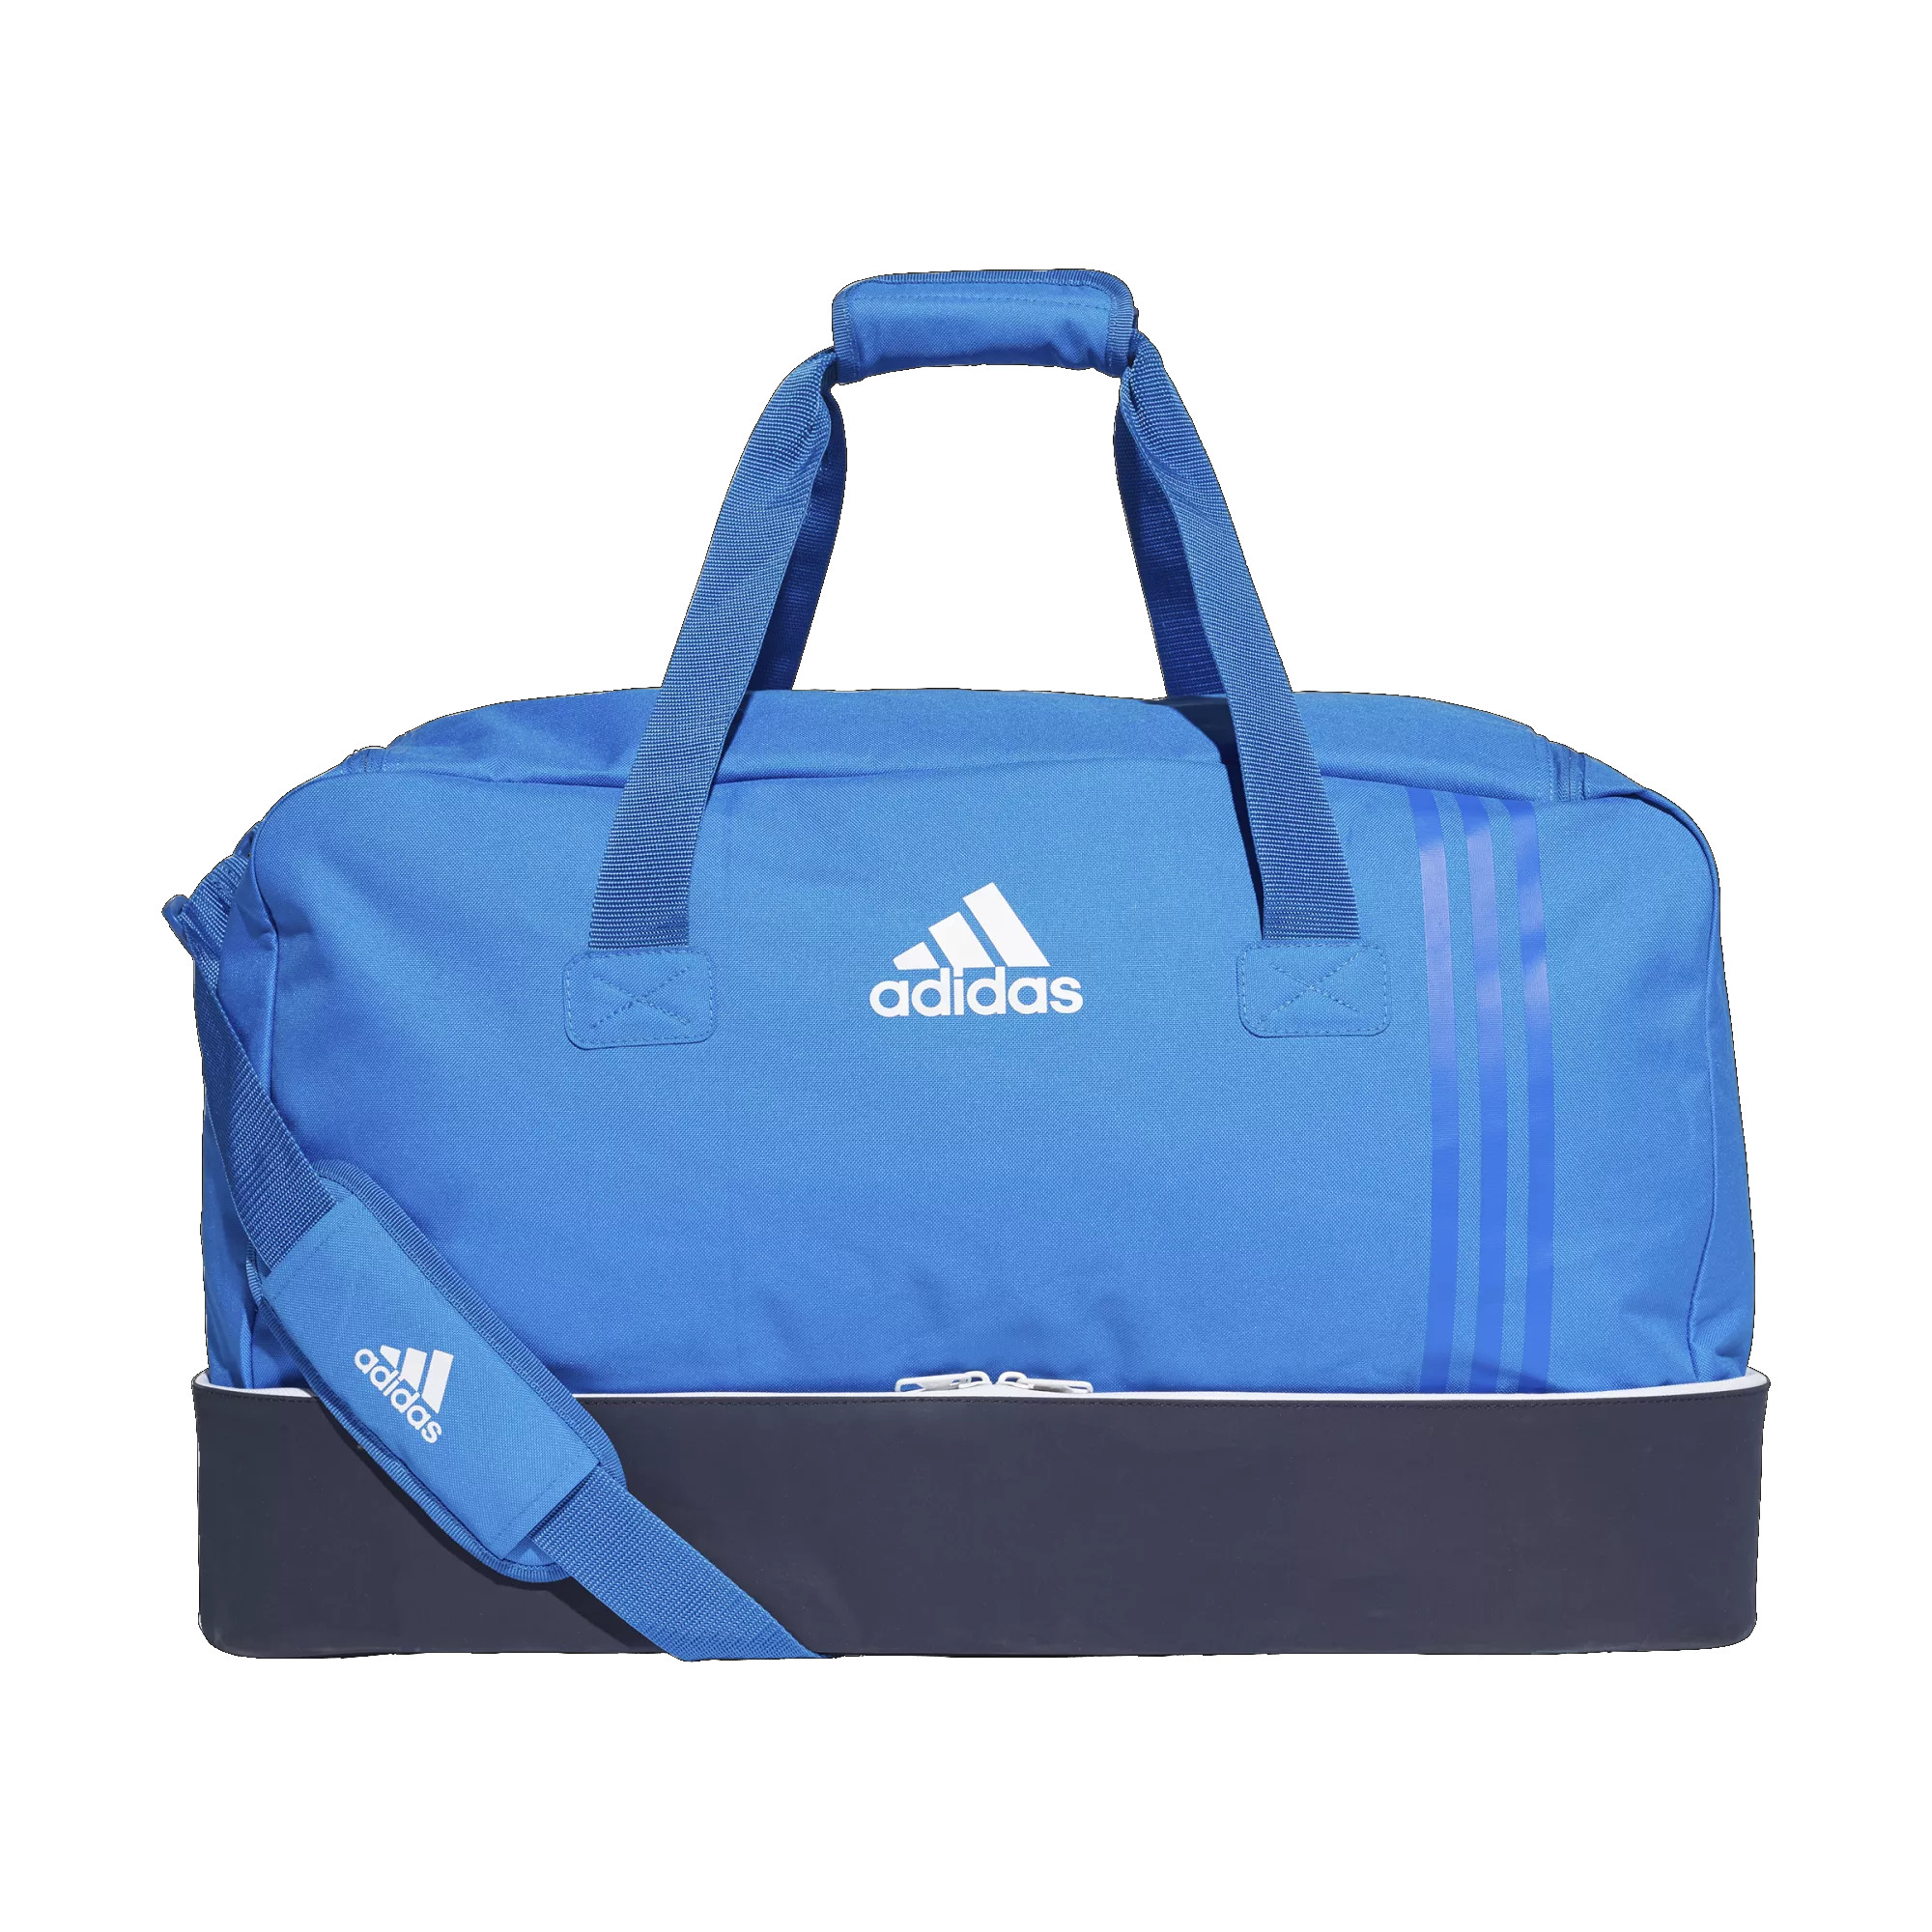 Adidas Tiro Bag with Bottom Compartment Large (blue)